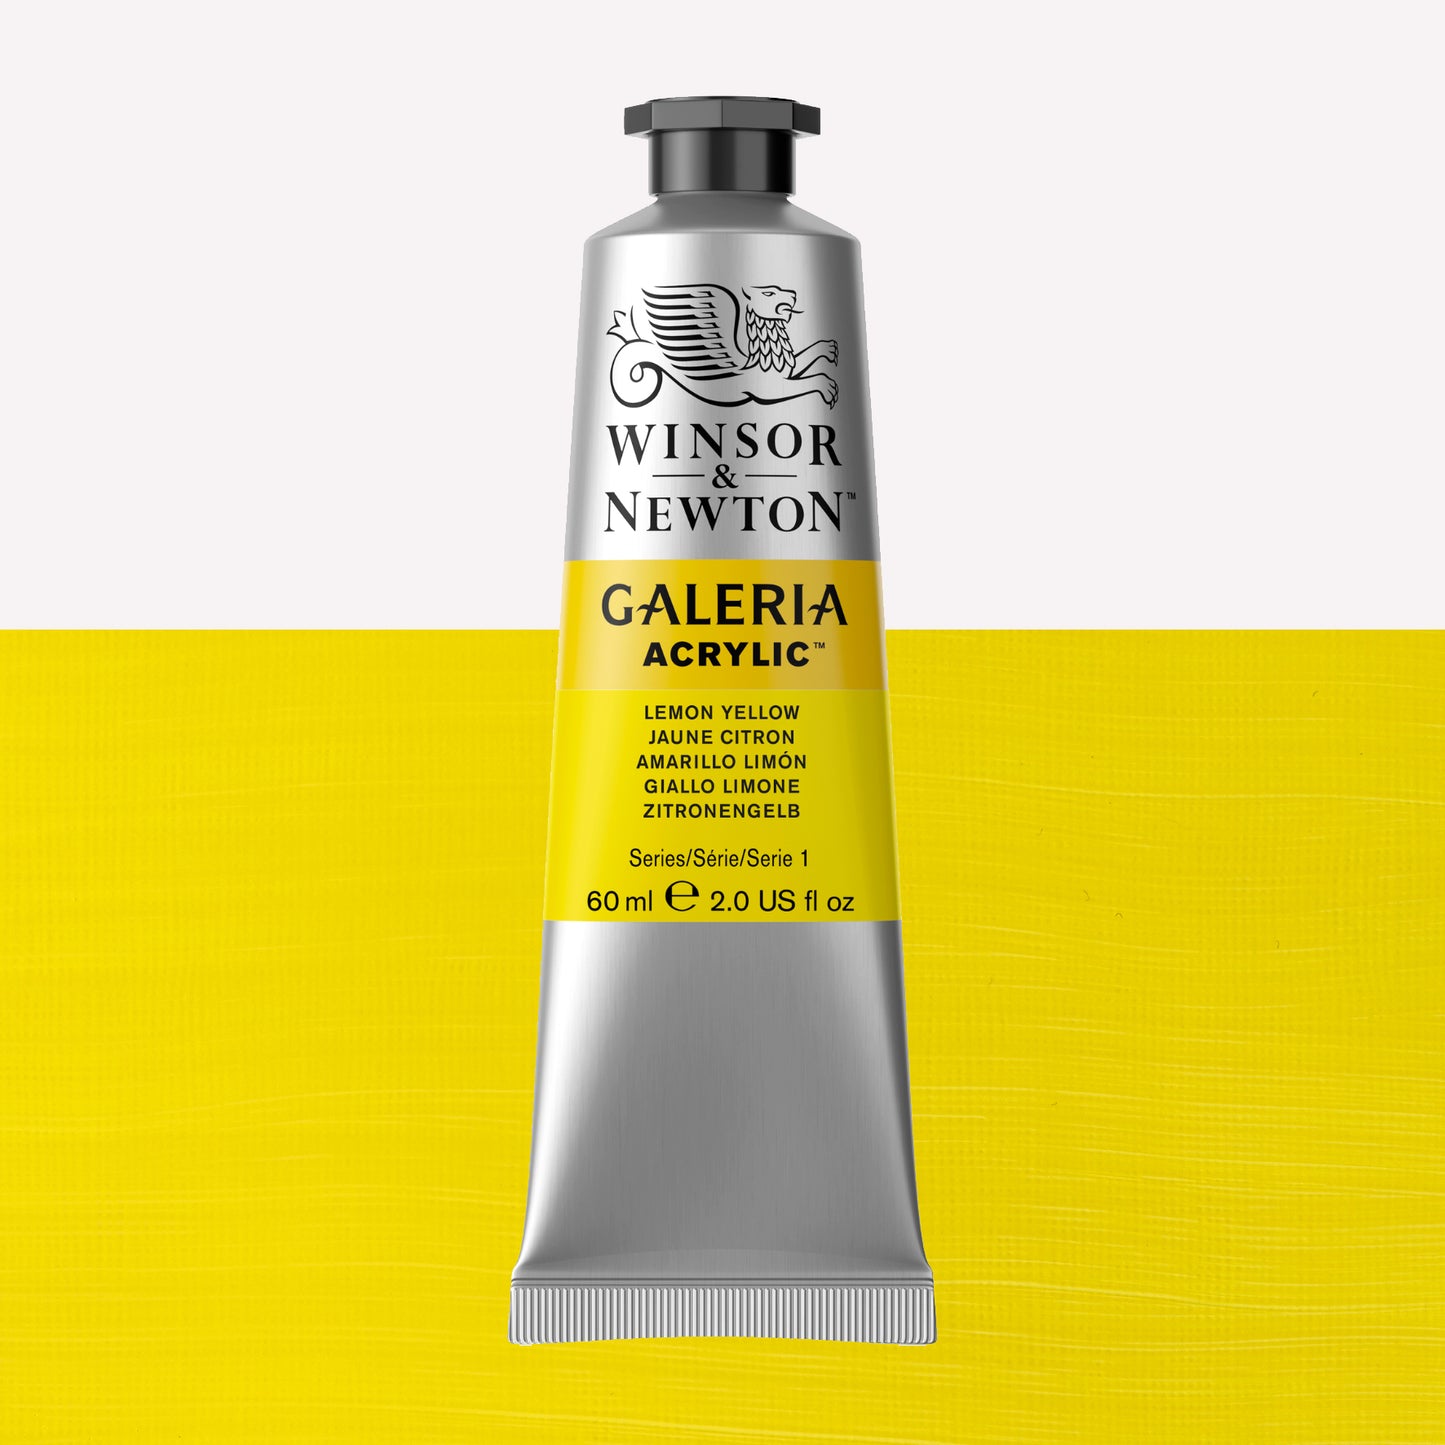 A 60ml tube of vibrant Galeria Acrylic paint in the shade Lemon Yellow . This paint, made by Winsor and Newton, is packaged in a silver tube with a black lid. 